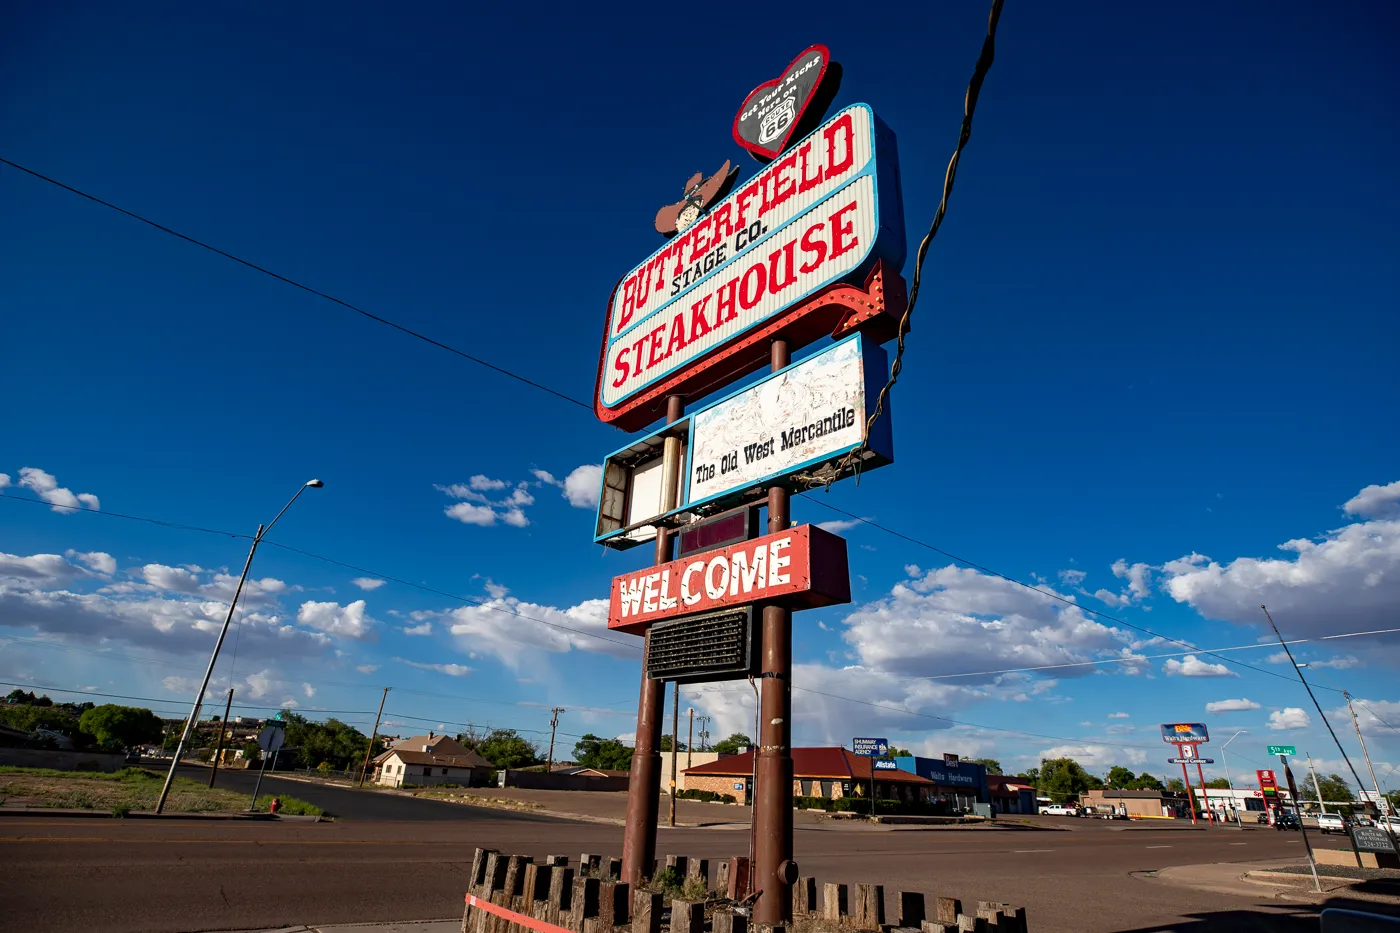 Butterfield Stage Co Steak House in Holbrook, Arizona - Route 66 Restaurant